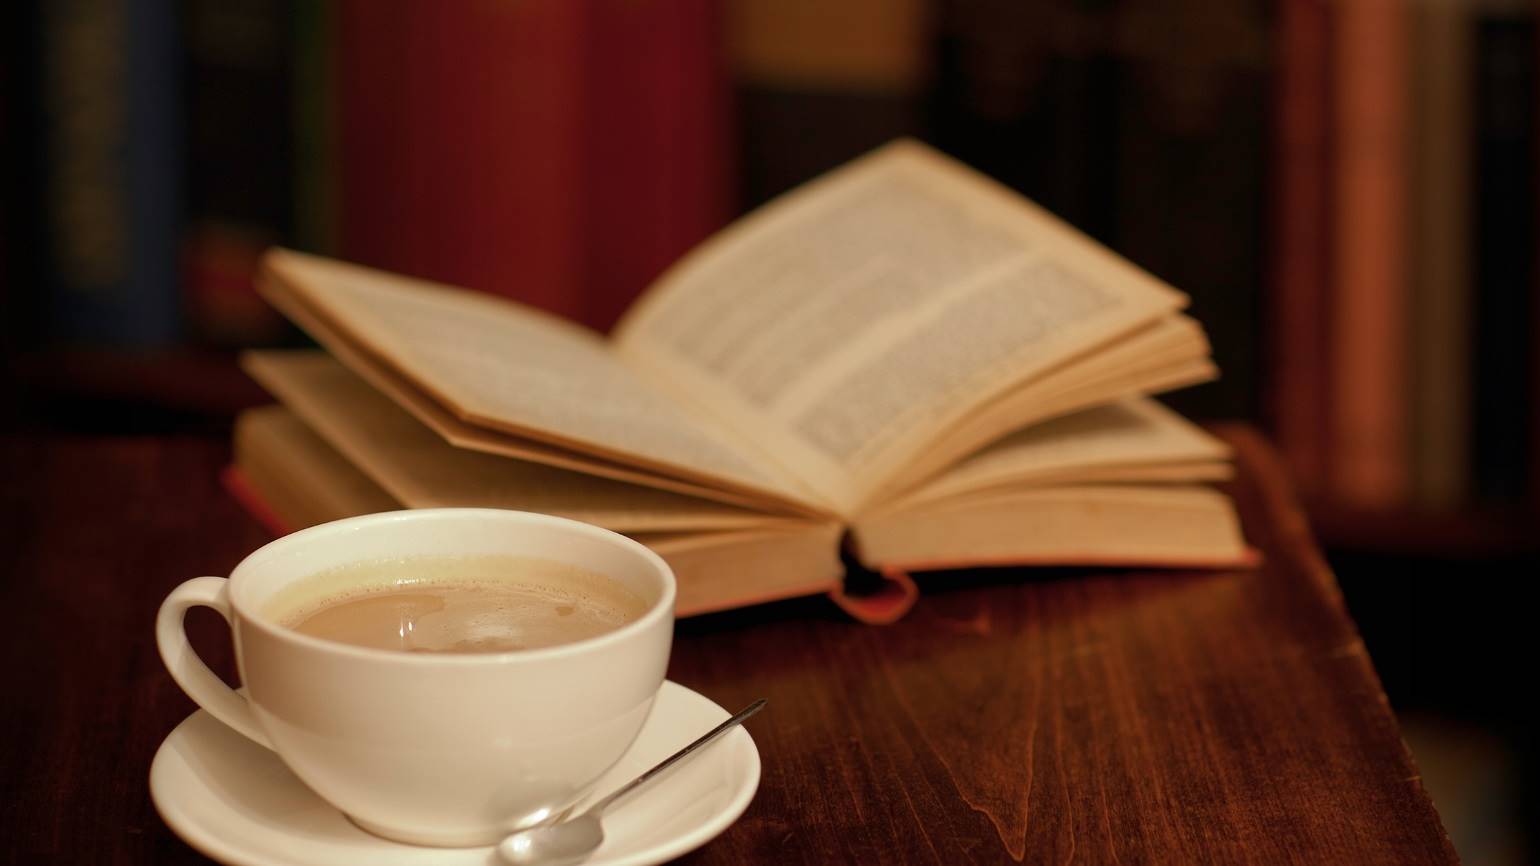 Book next to coffee